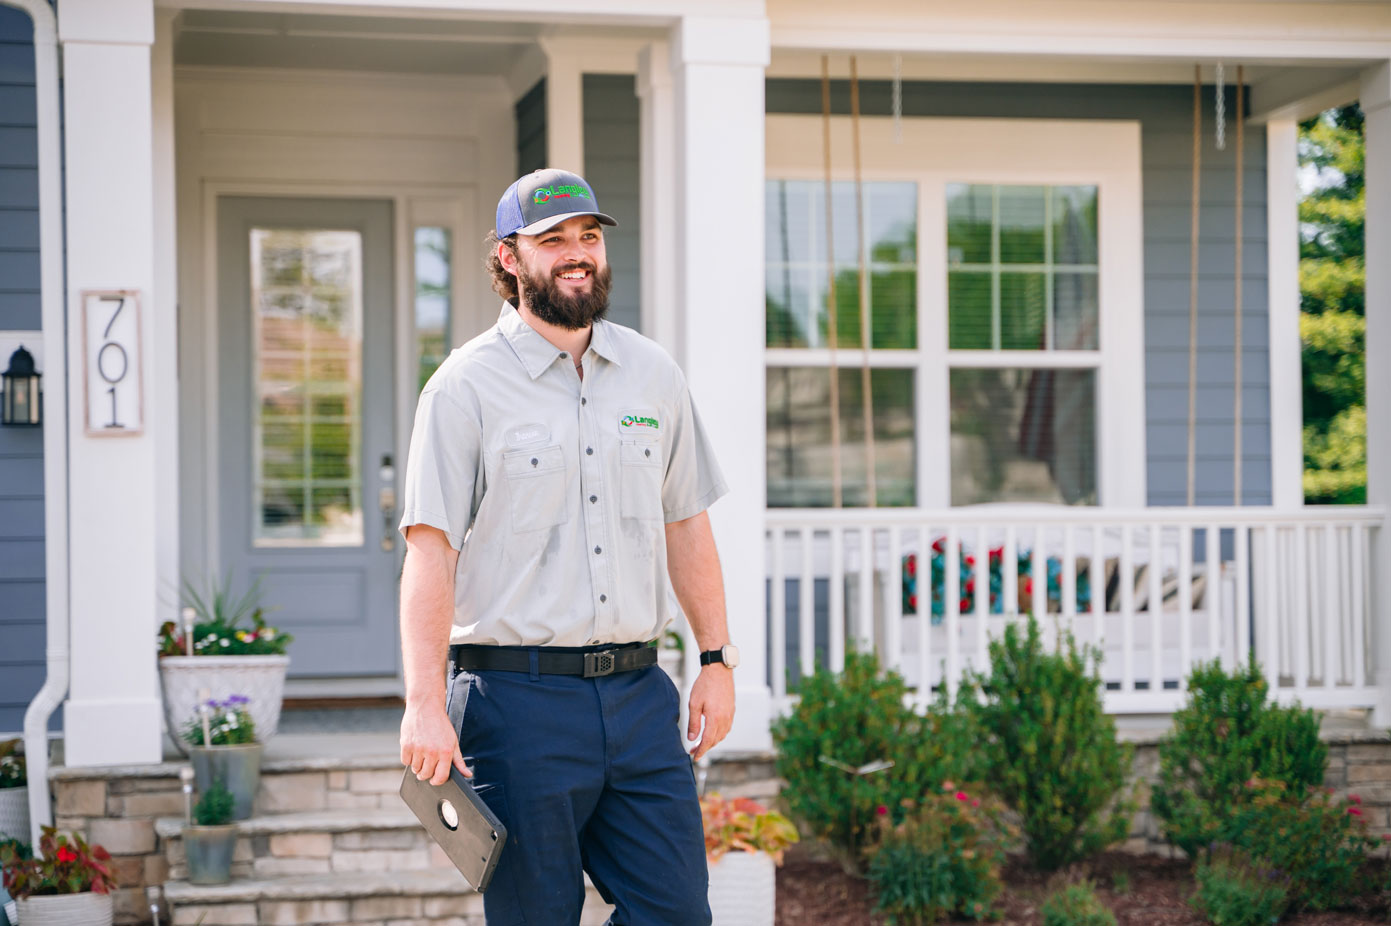 Residential heating and air conditioning service technician in Raleigh and Wake County